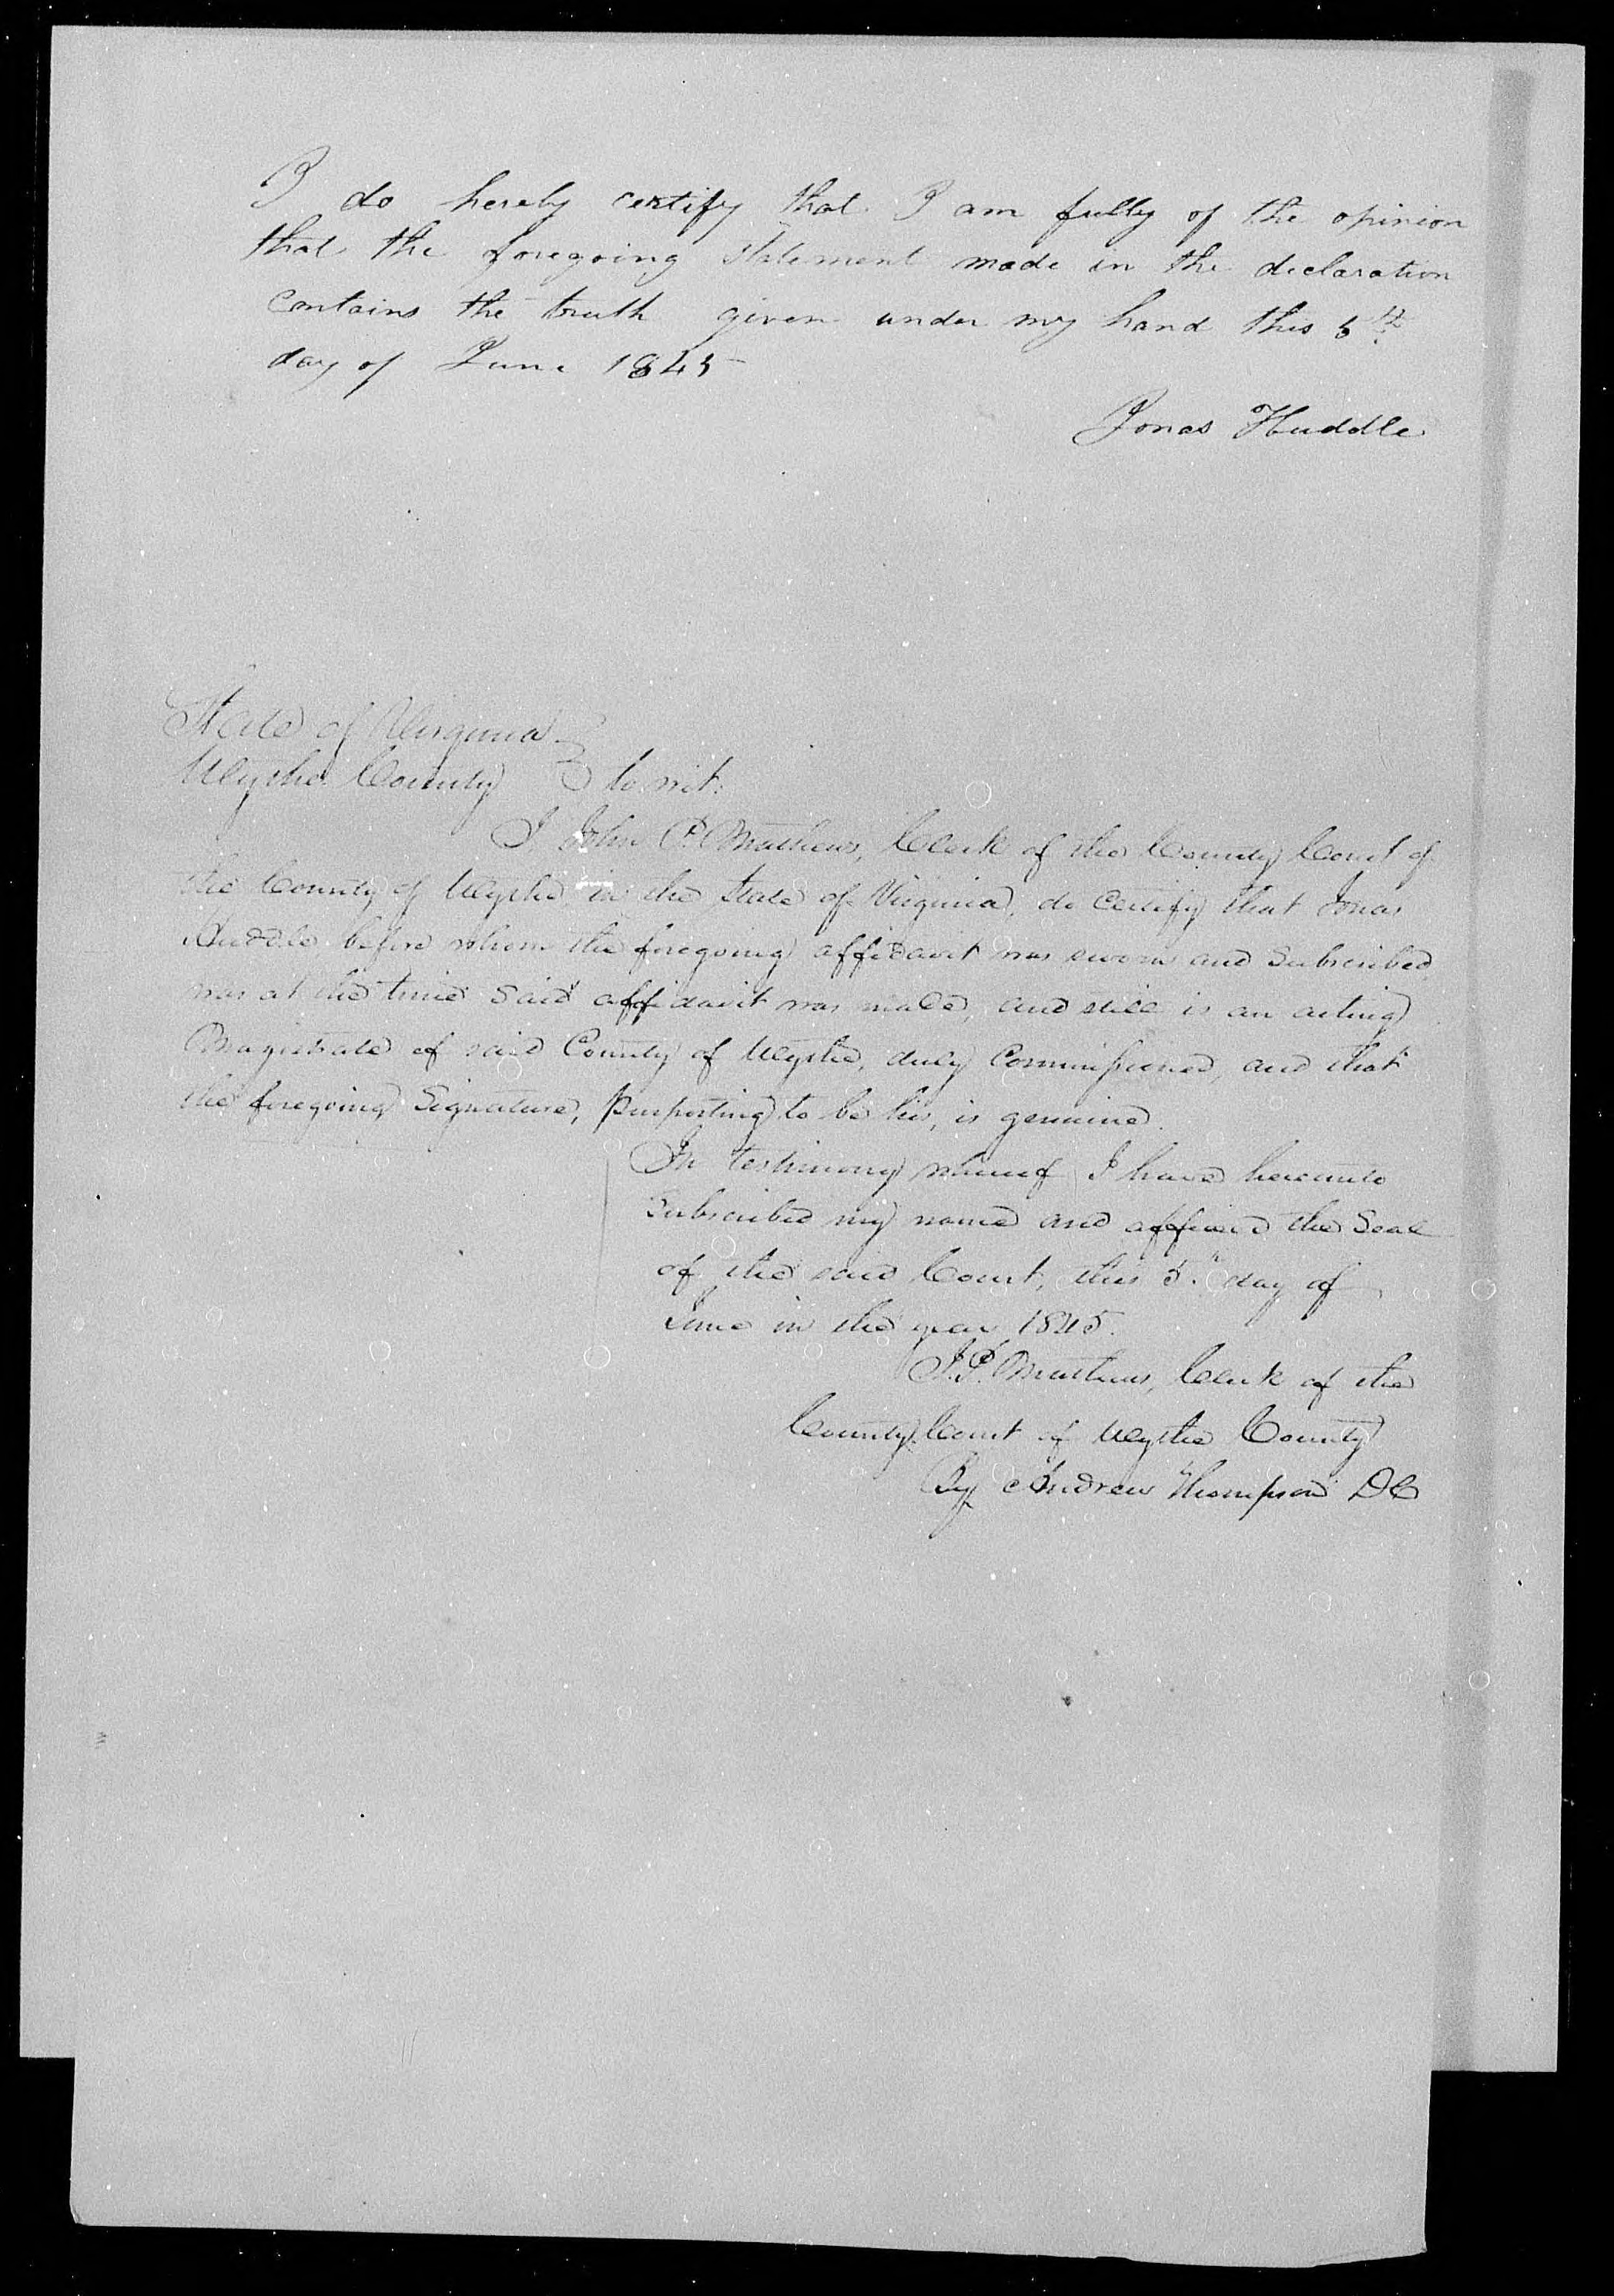 Application for a Widow's Pension from Margaret Kinder, 5 June 1845, page 2